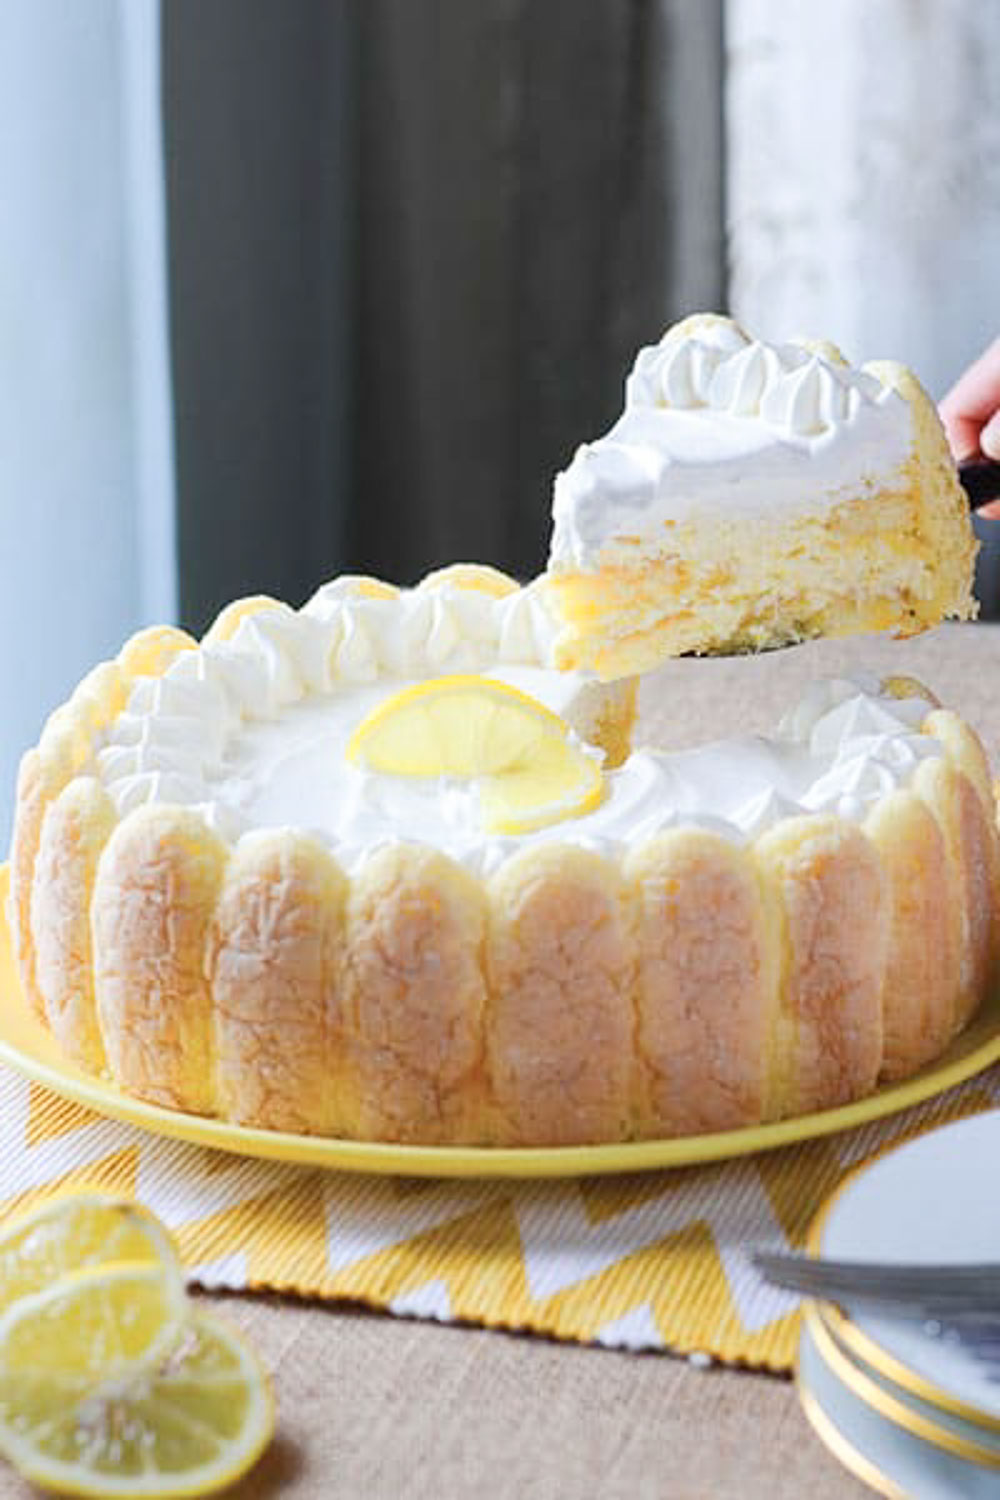 A whole cake on a yellow plate with a slice of cake being lifted by a hand on a black spatula above it.